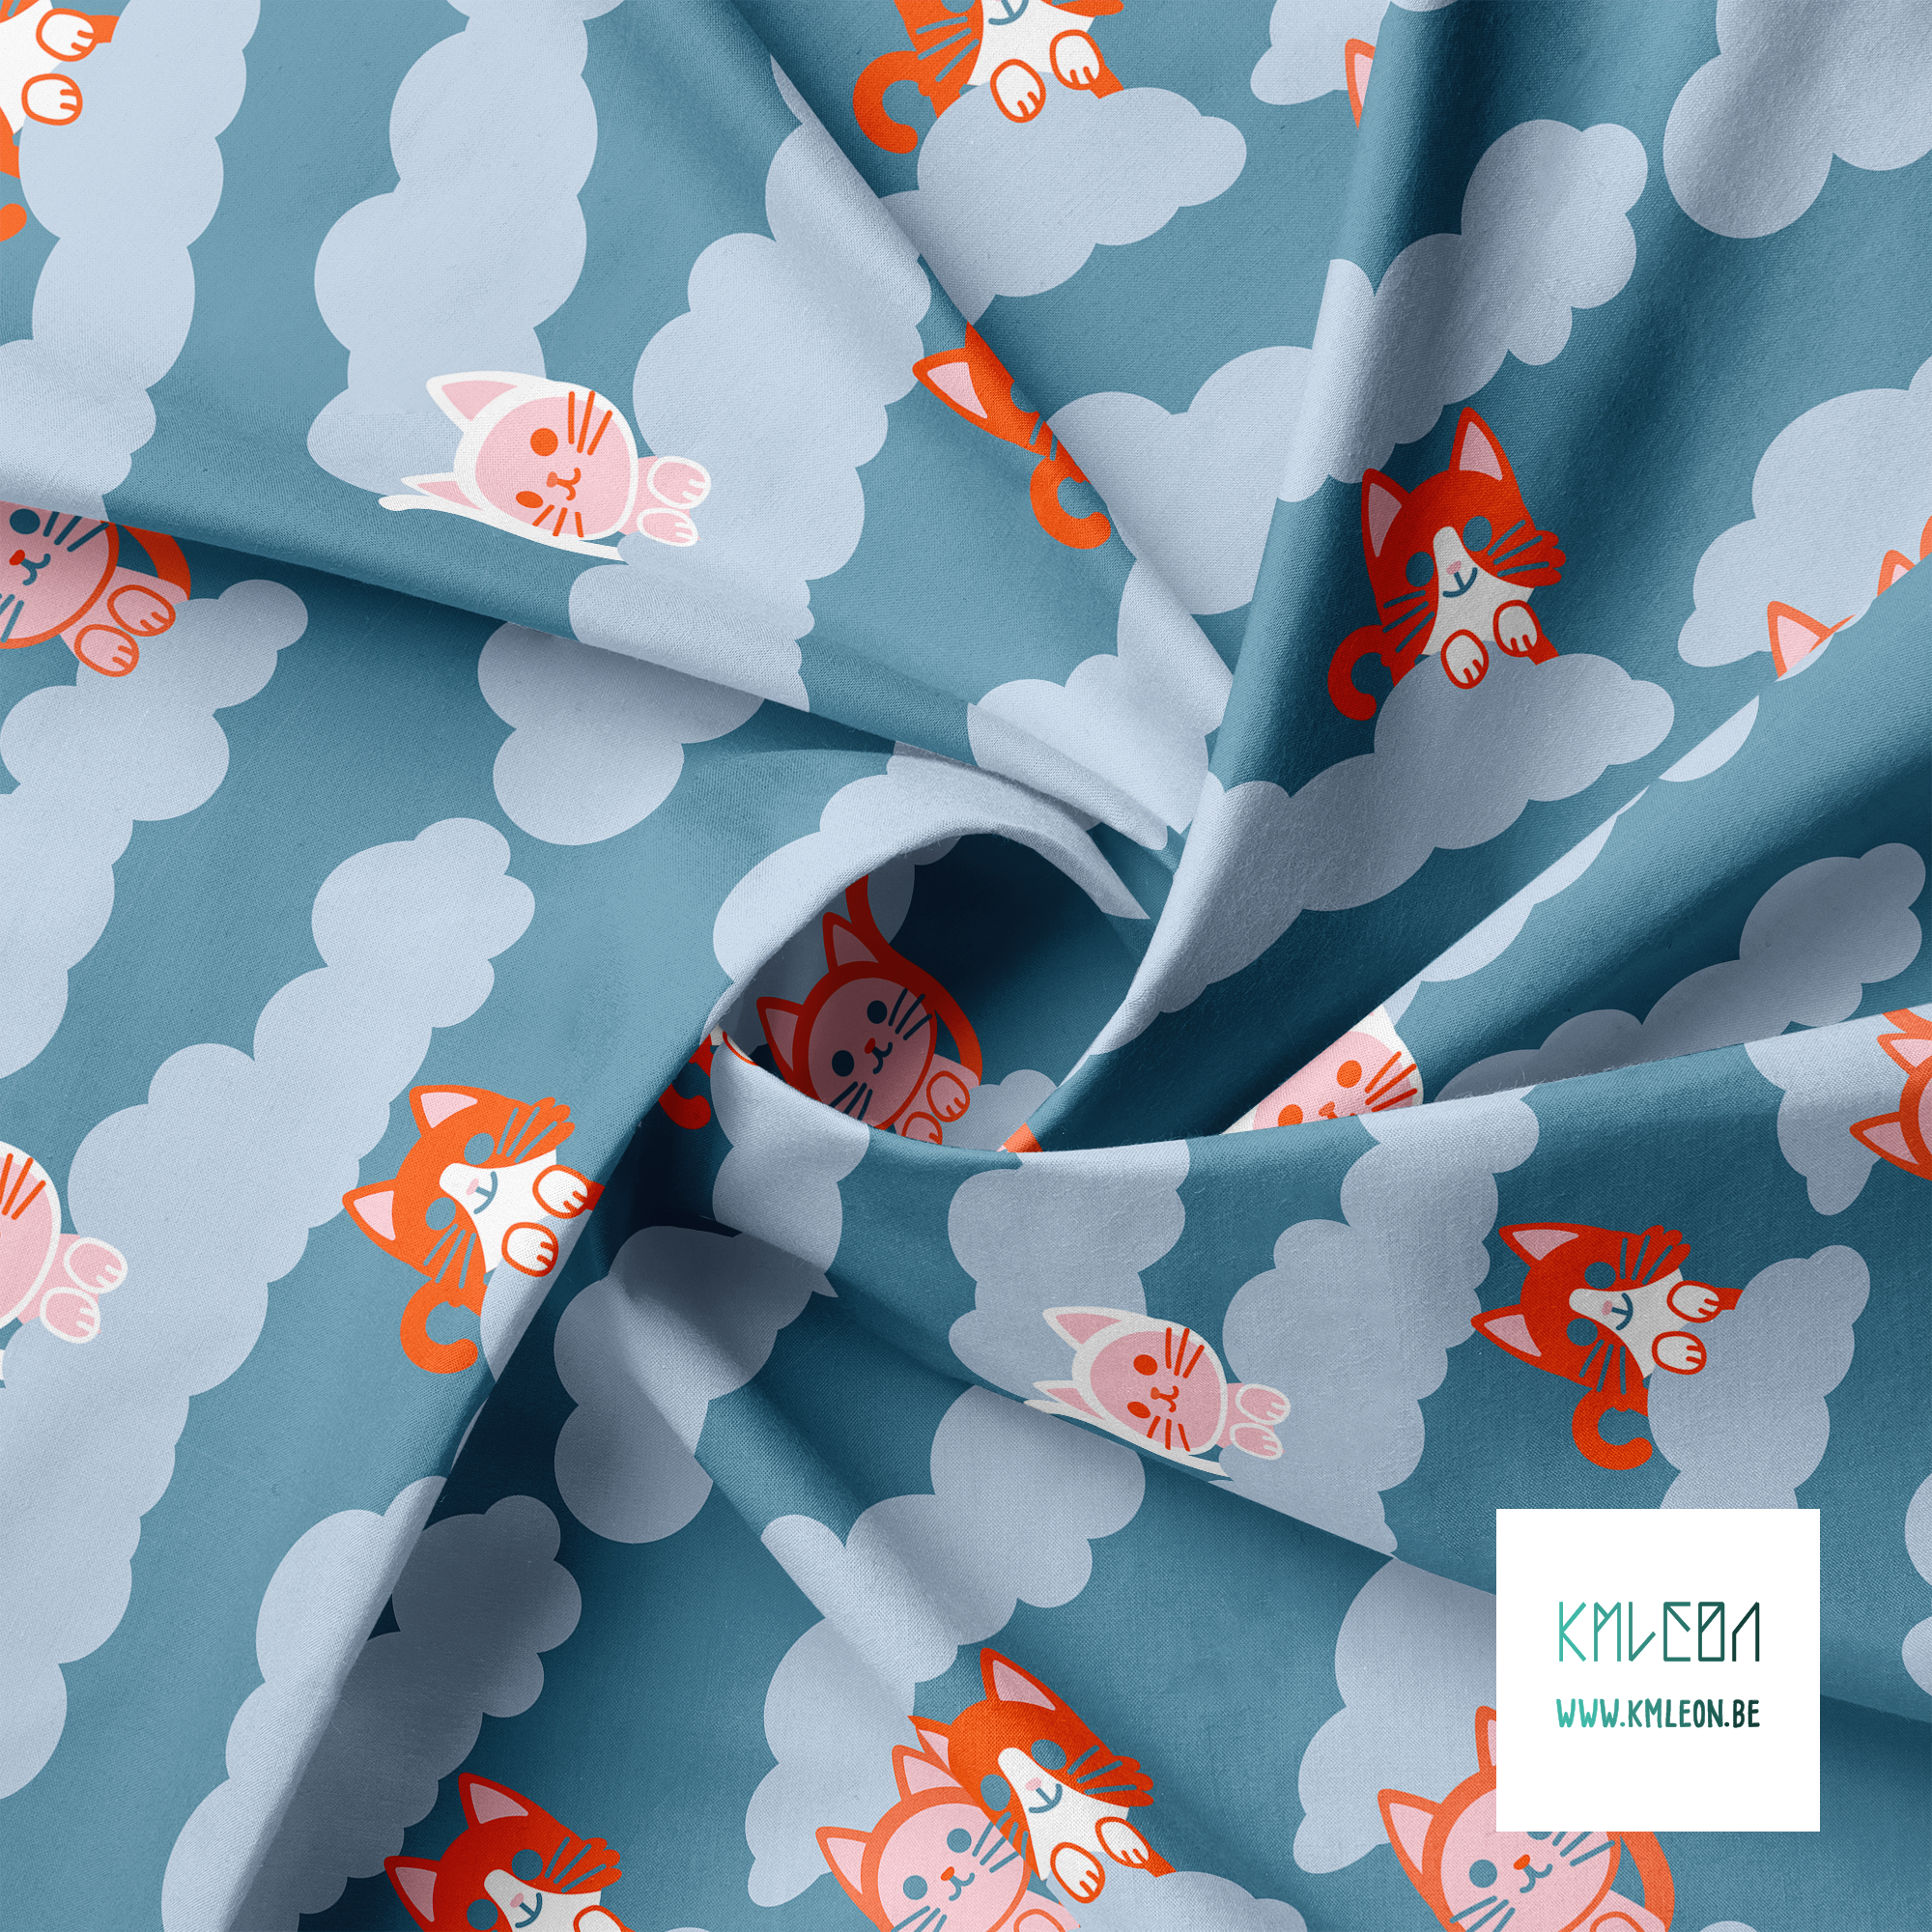 Cats in the clouds fabric